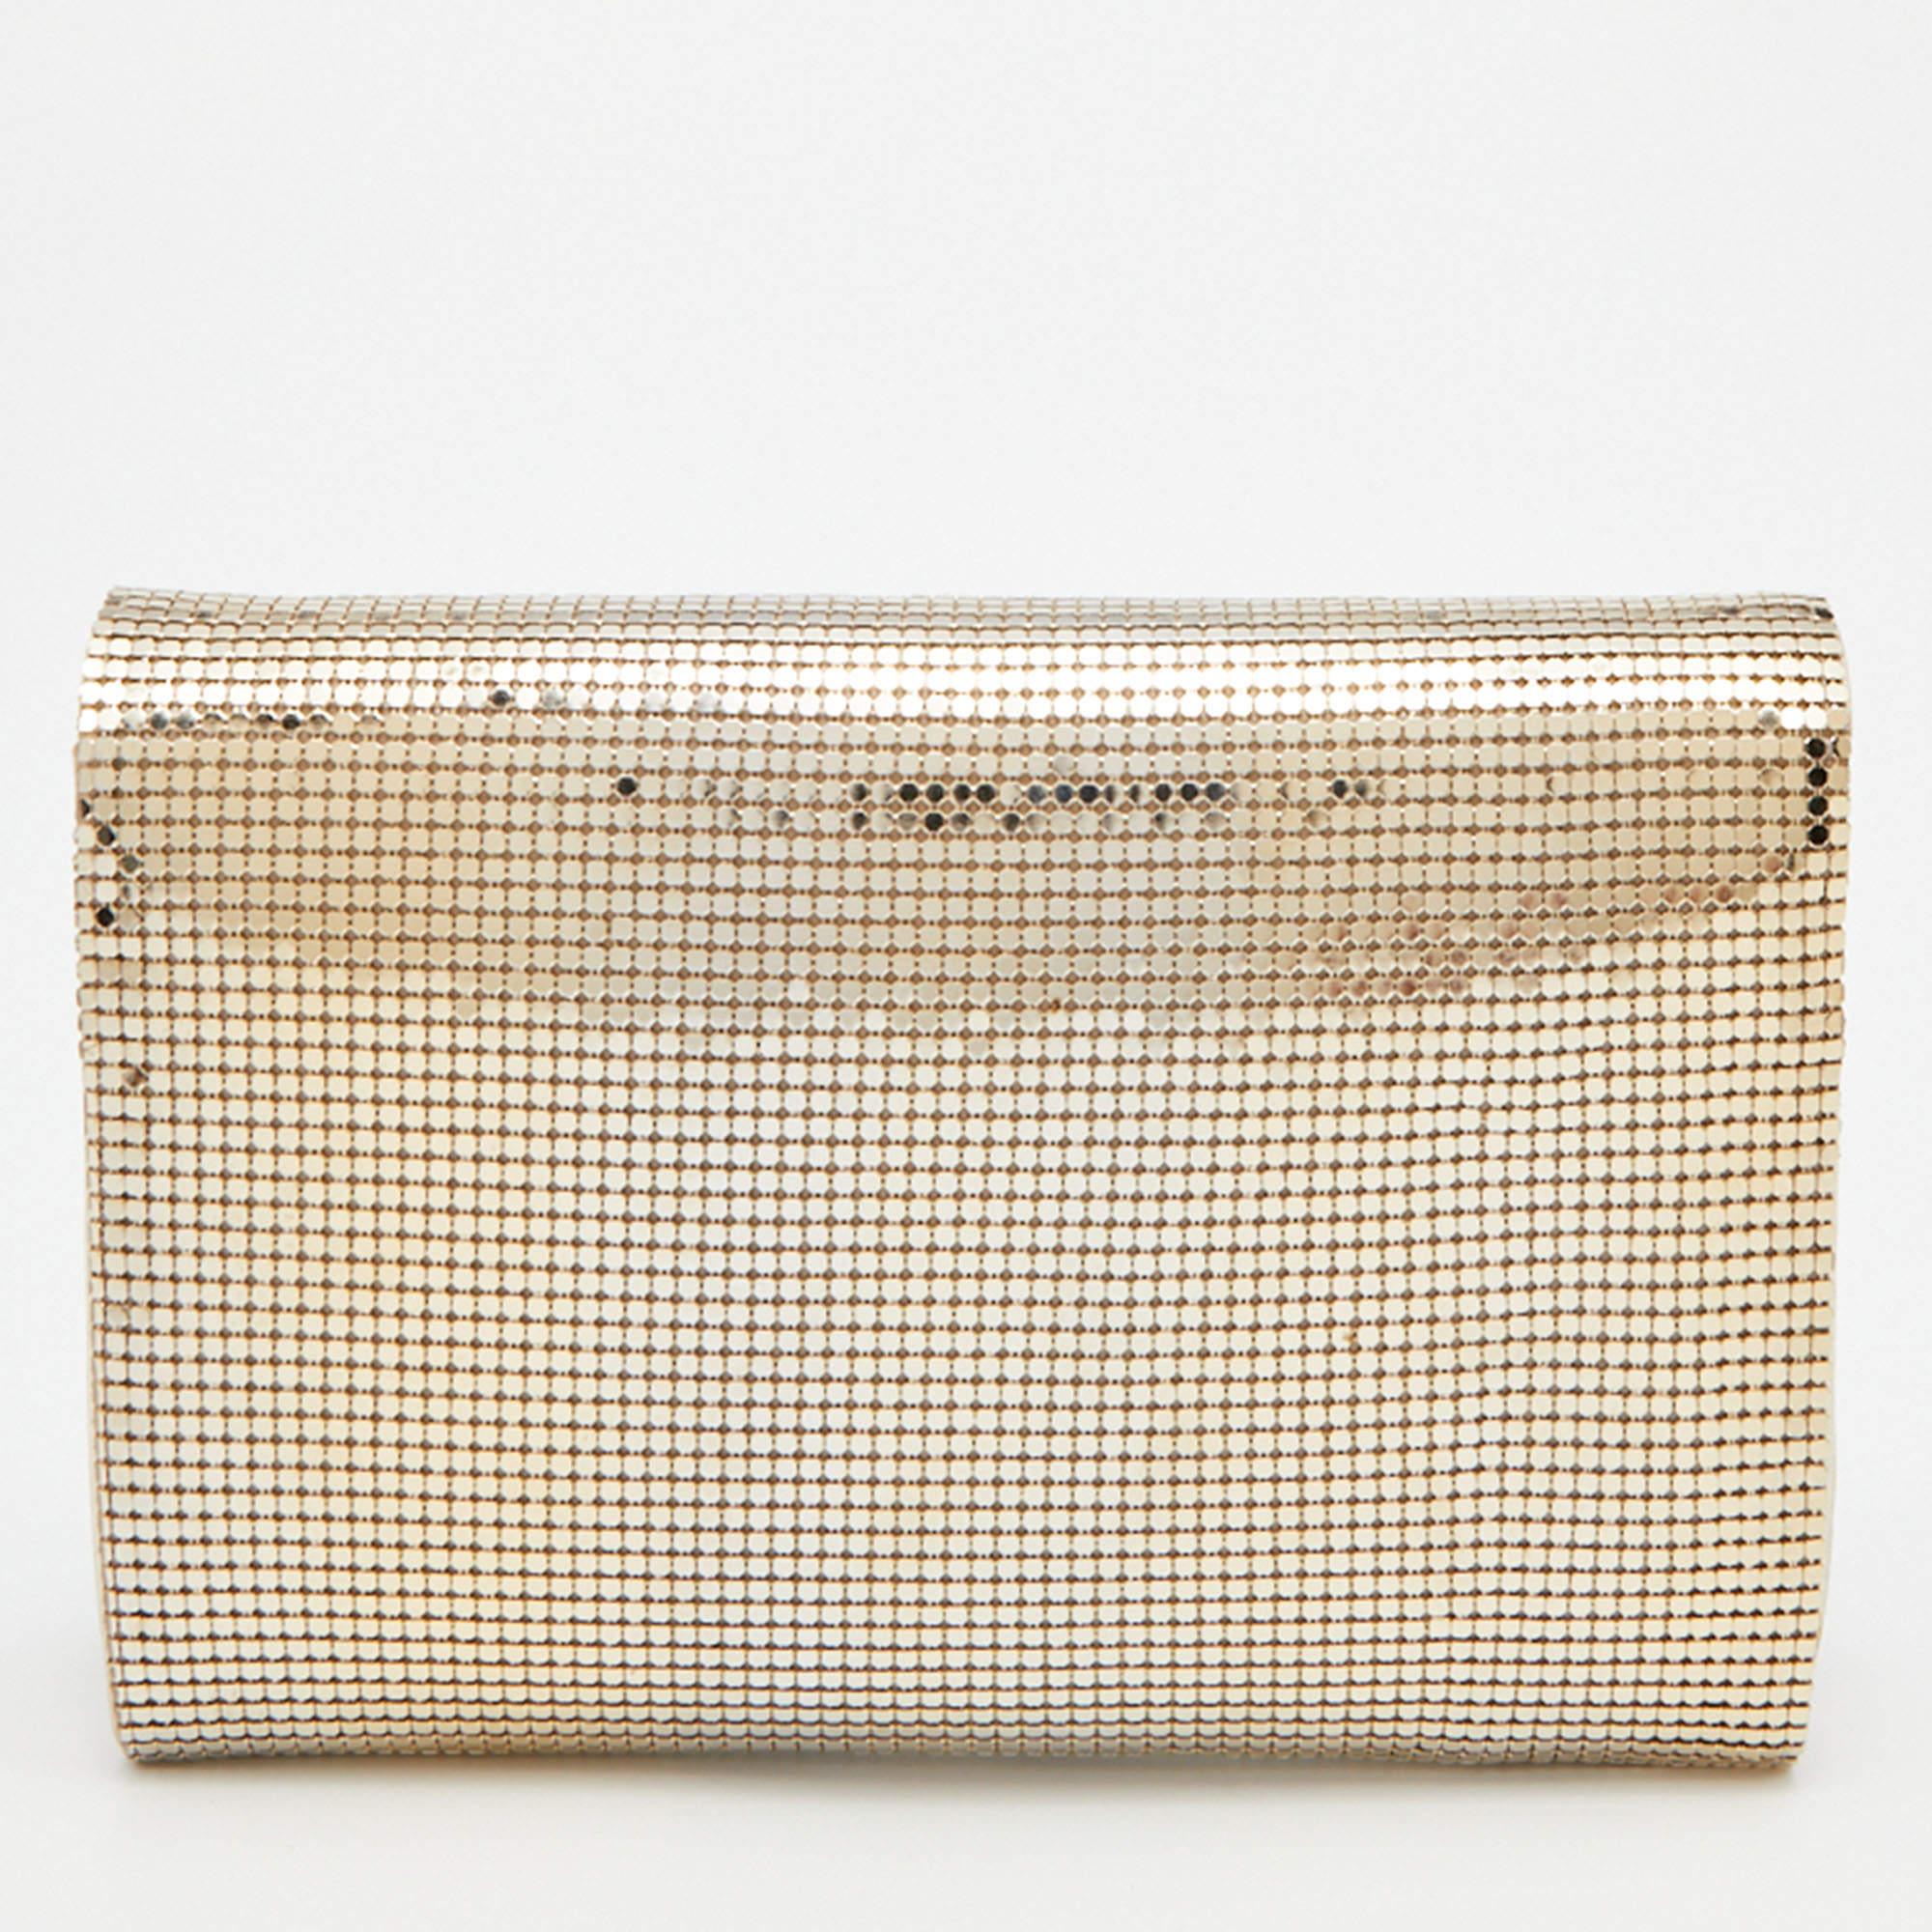 This clutch is just the right accessory to compliment your chic ensemble. It comes crafted in quality material featuring a well-sized interior that can comfortably hold all your little essentials.

Includes: Original Dustbag, Info Booklet,